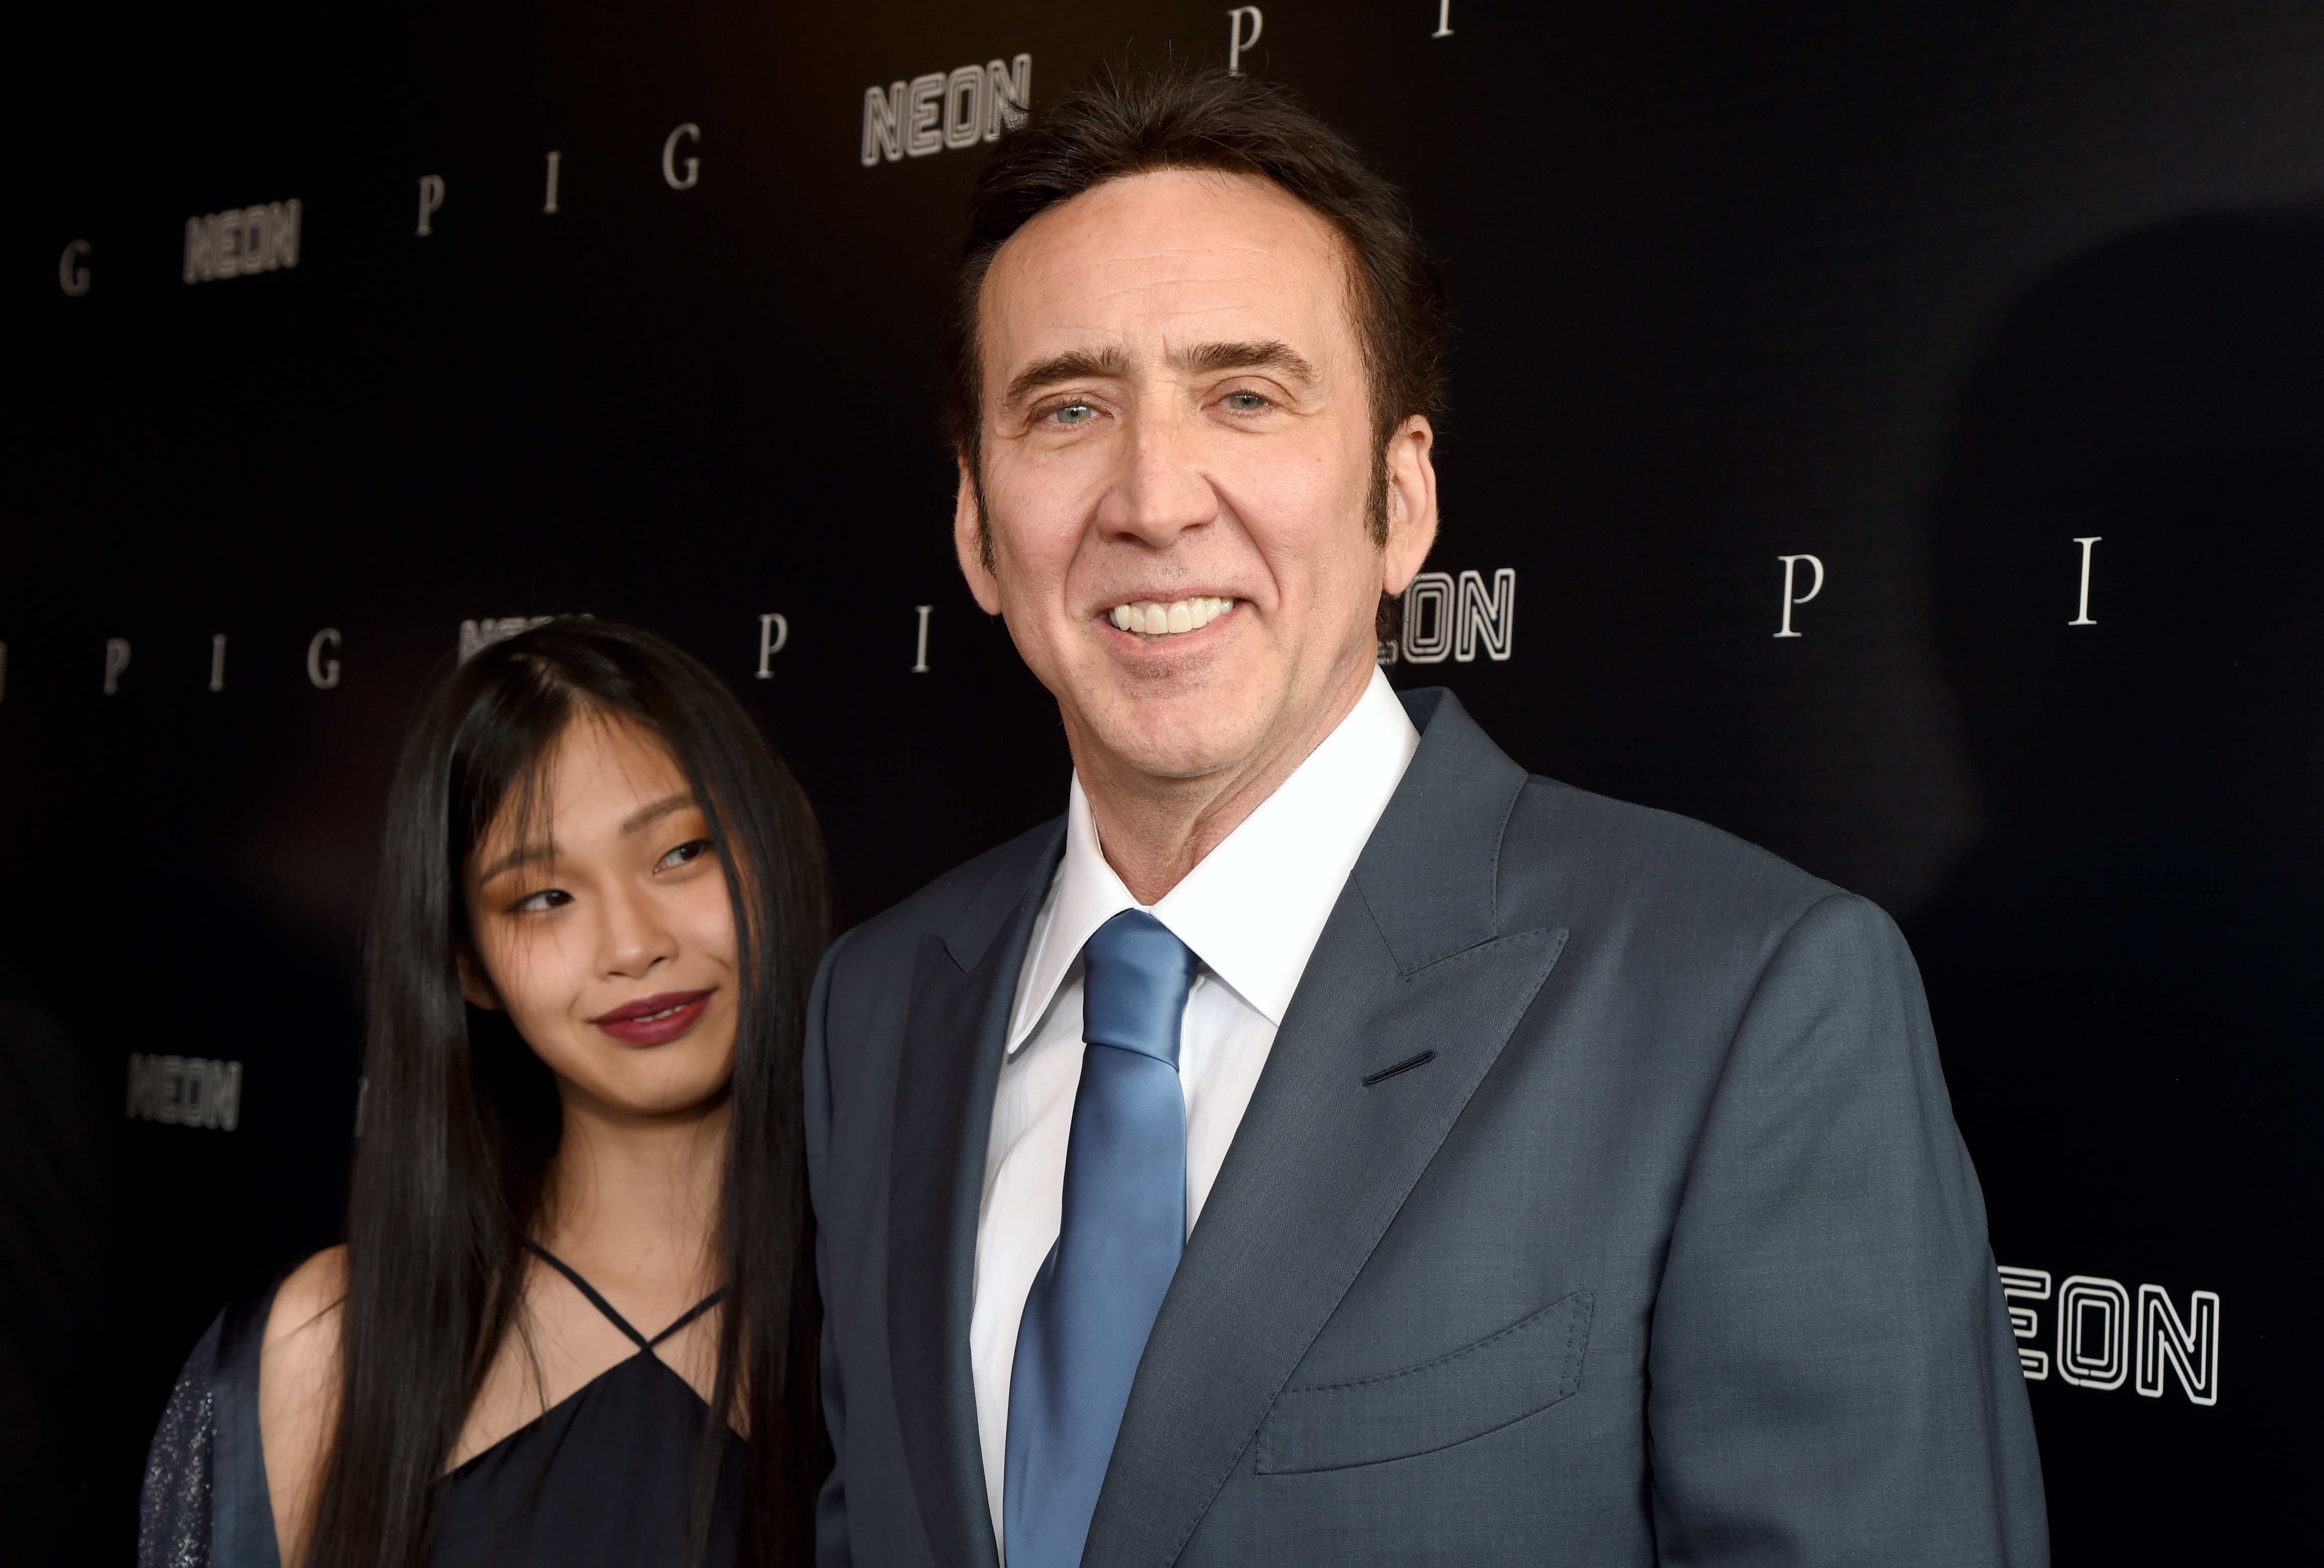 Riko Shibata and Nicolas Cage during the Neon premiere of "PIG" on July 13, 2021 in Los Angeles, California. / Source: Getty Images